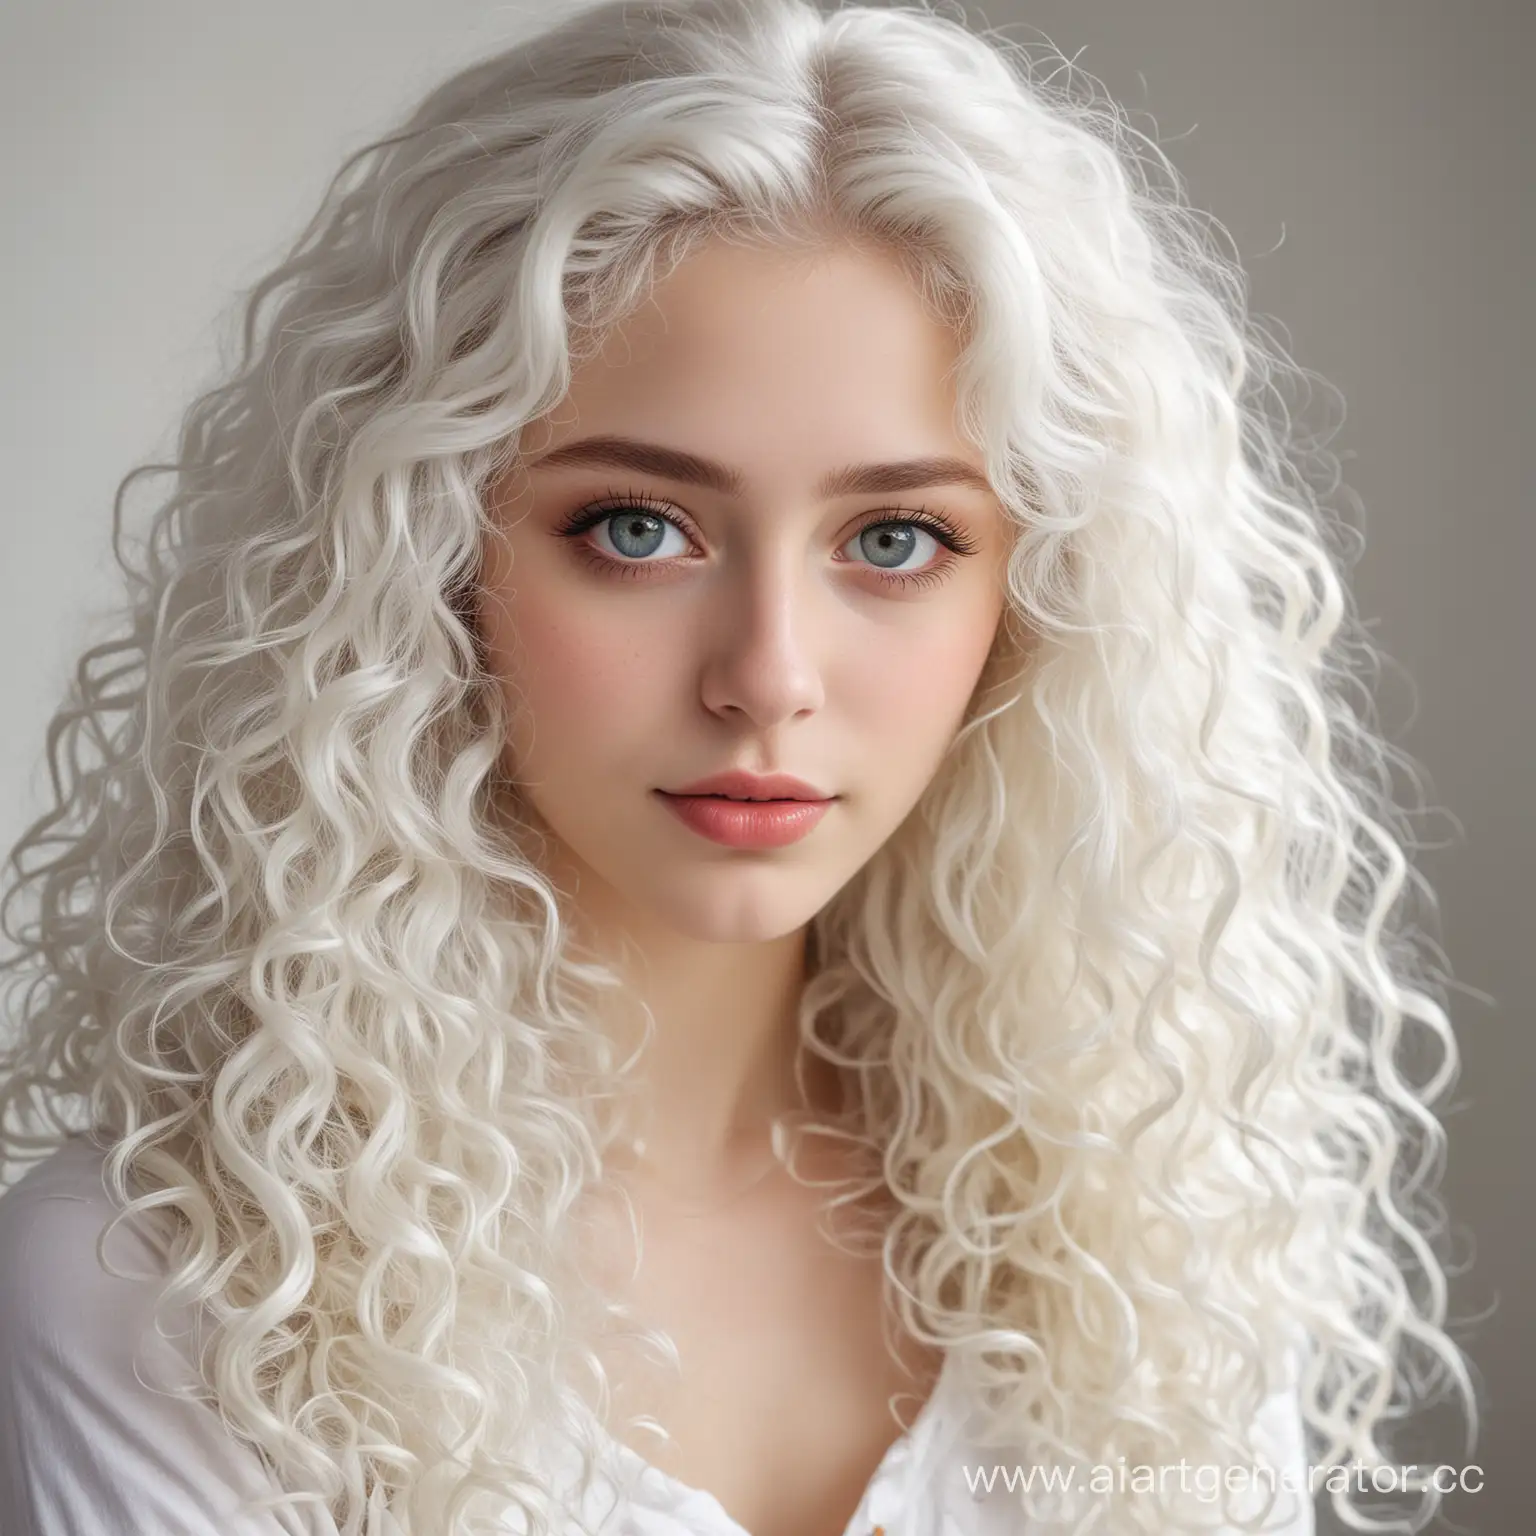 Enchanting-WhiteHaired-Girl-with-MilkColored-Eyes